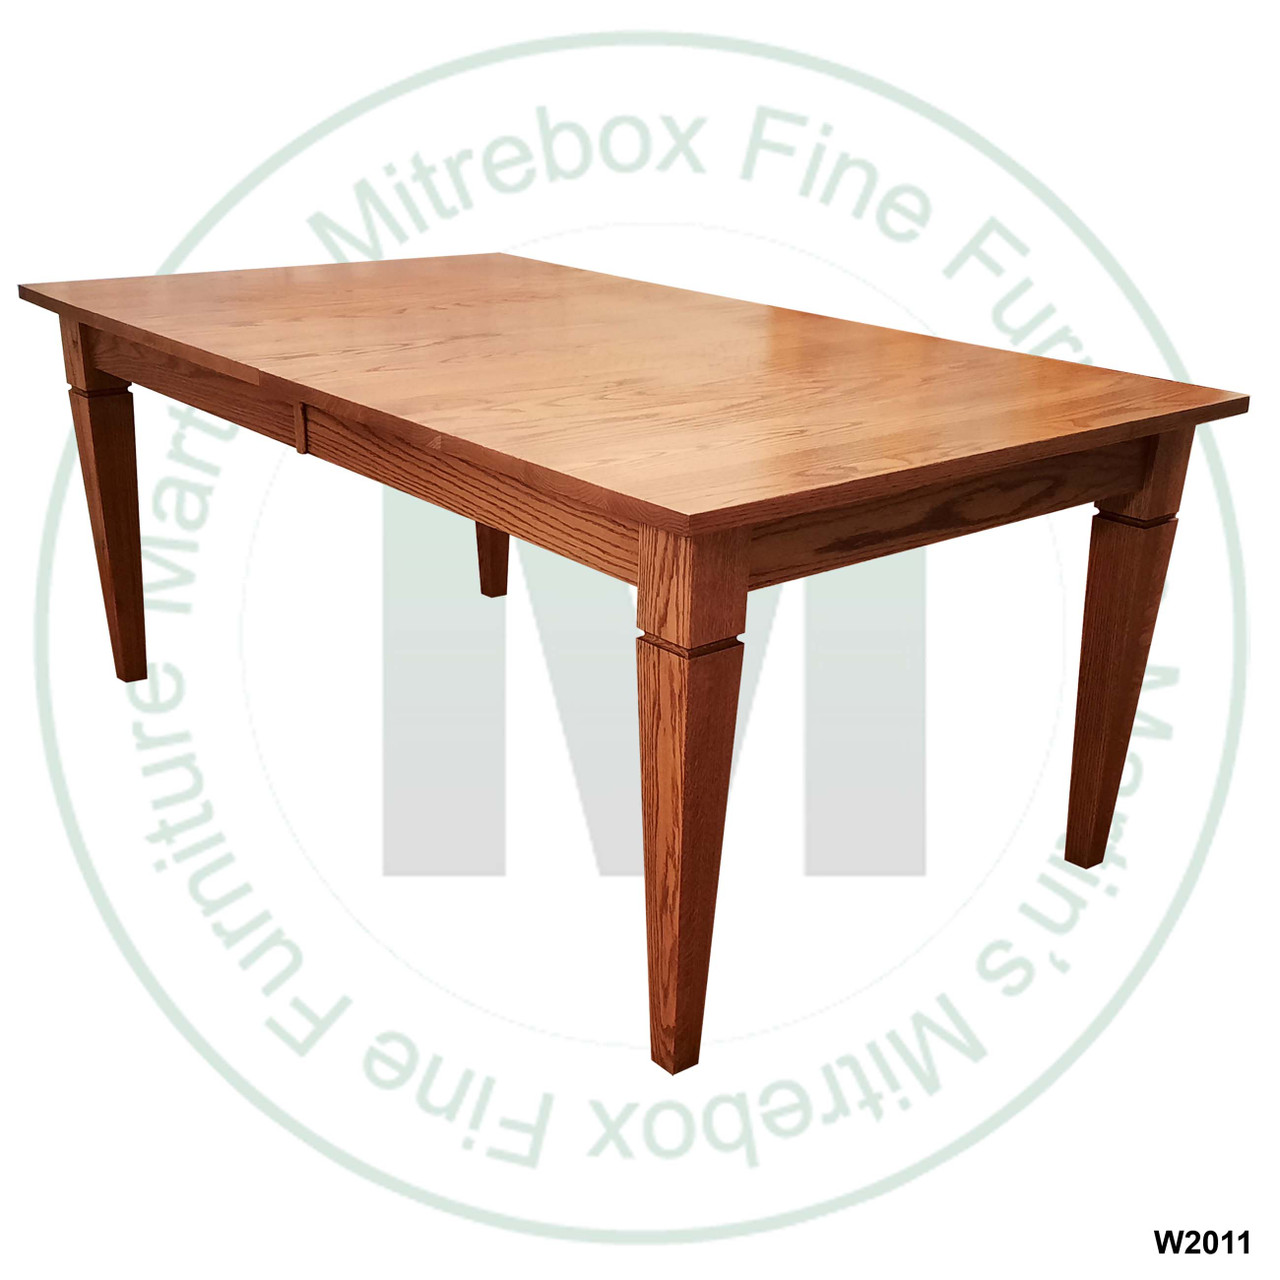 Oak Reesor Solid Top Harvest Table 48''D x 108''W x 30''H Table Has 1 3/4'' Thick Top